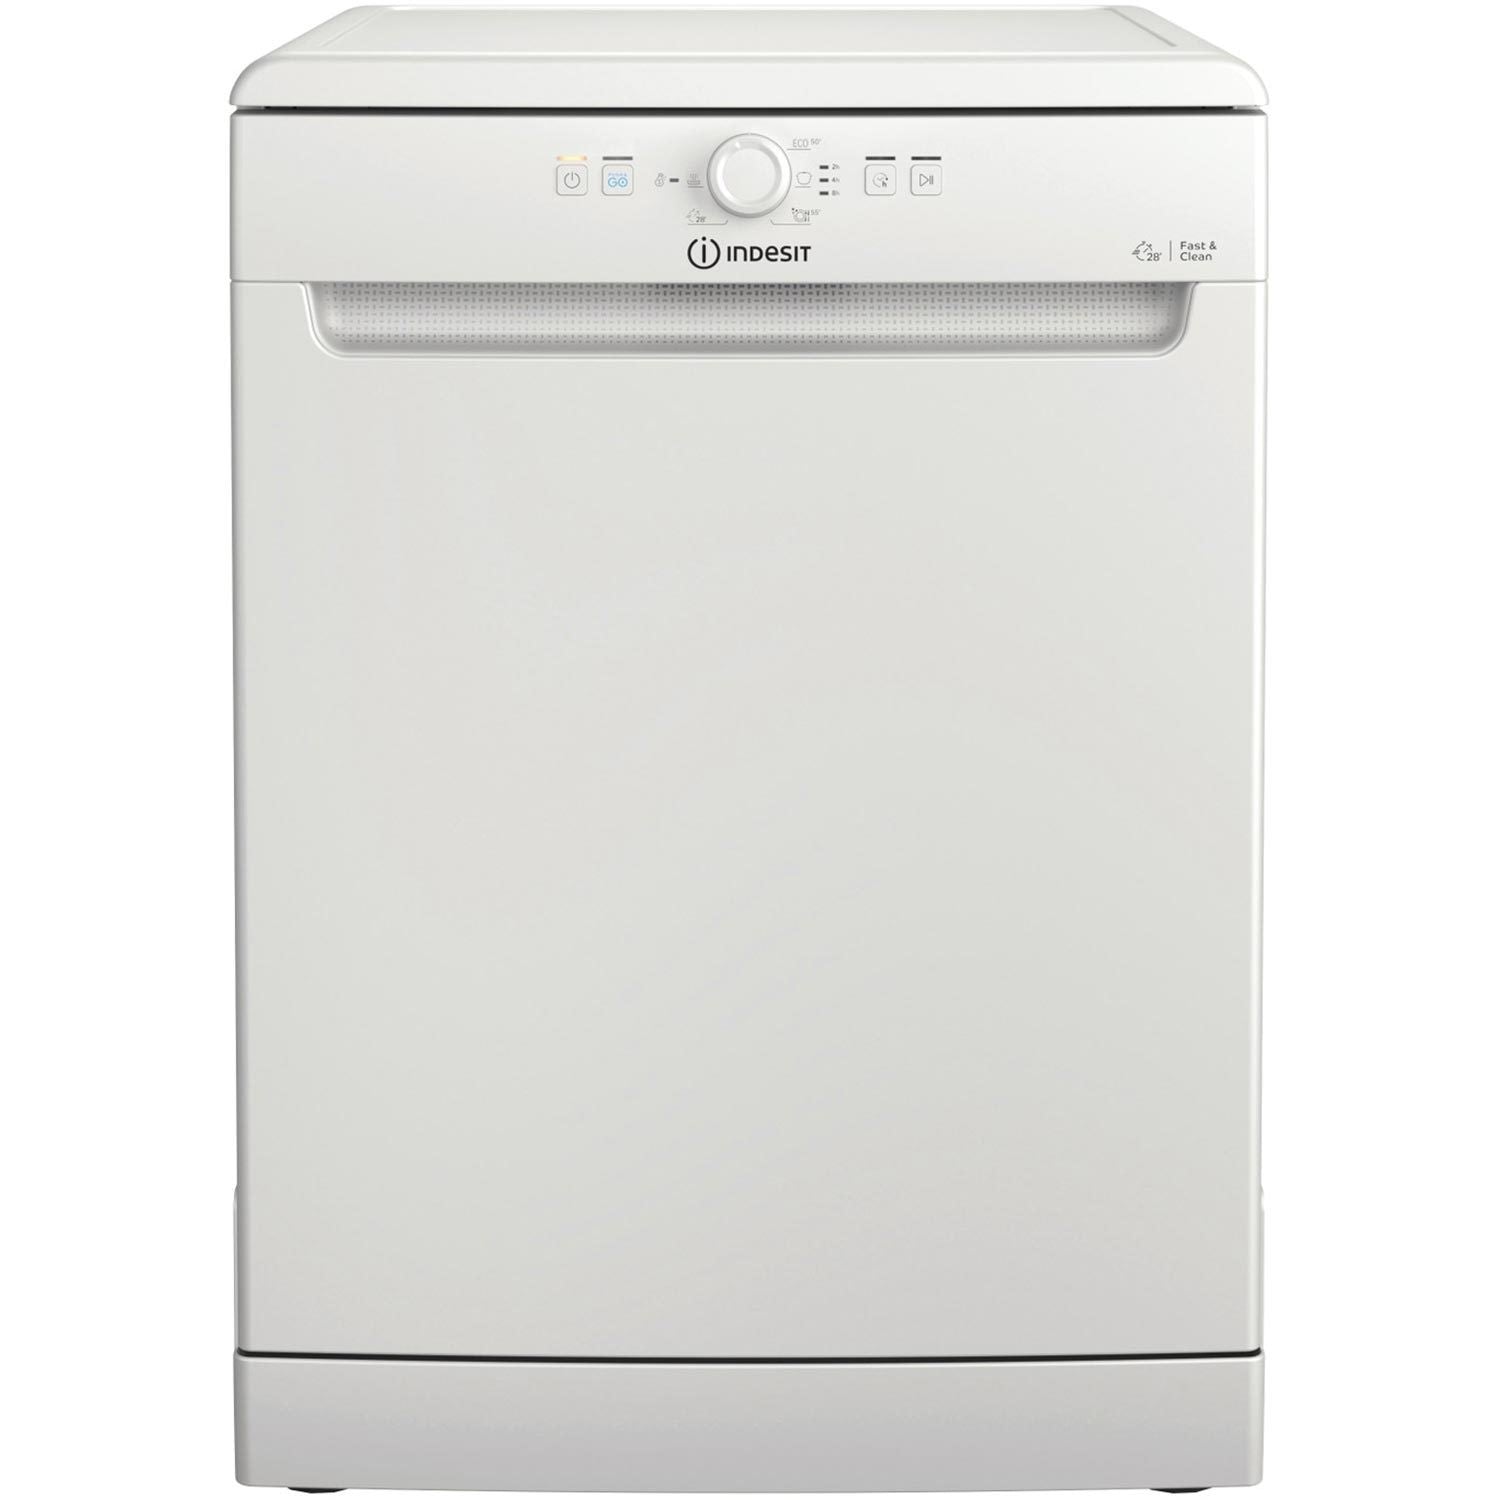 Indesit 14 Place Freestanding Dishwasher - White | D2FHK26UK from Indesit - DID Electrical